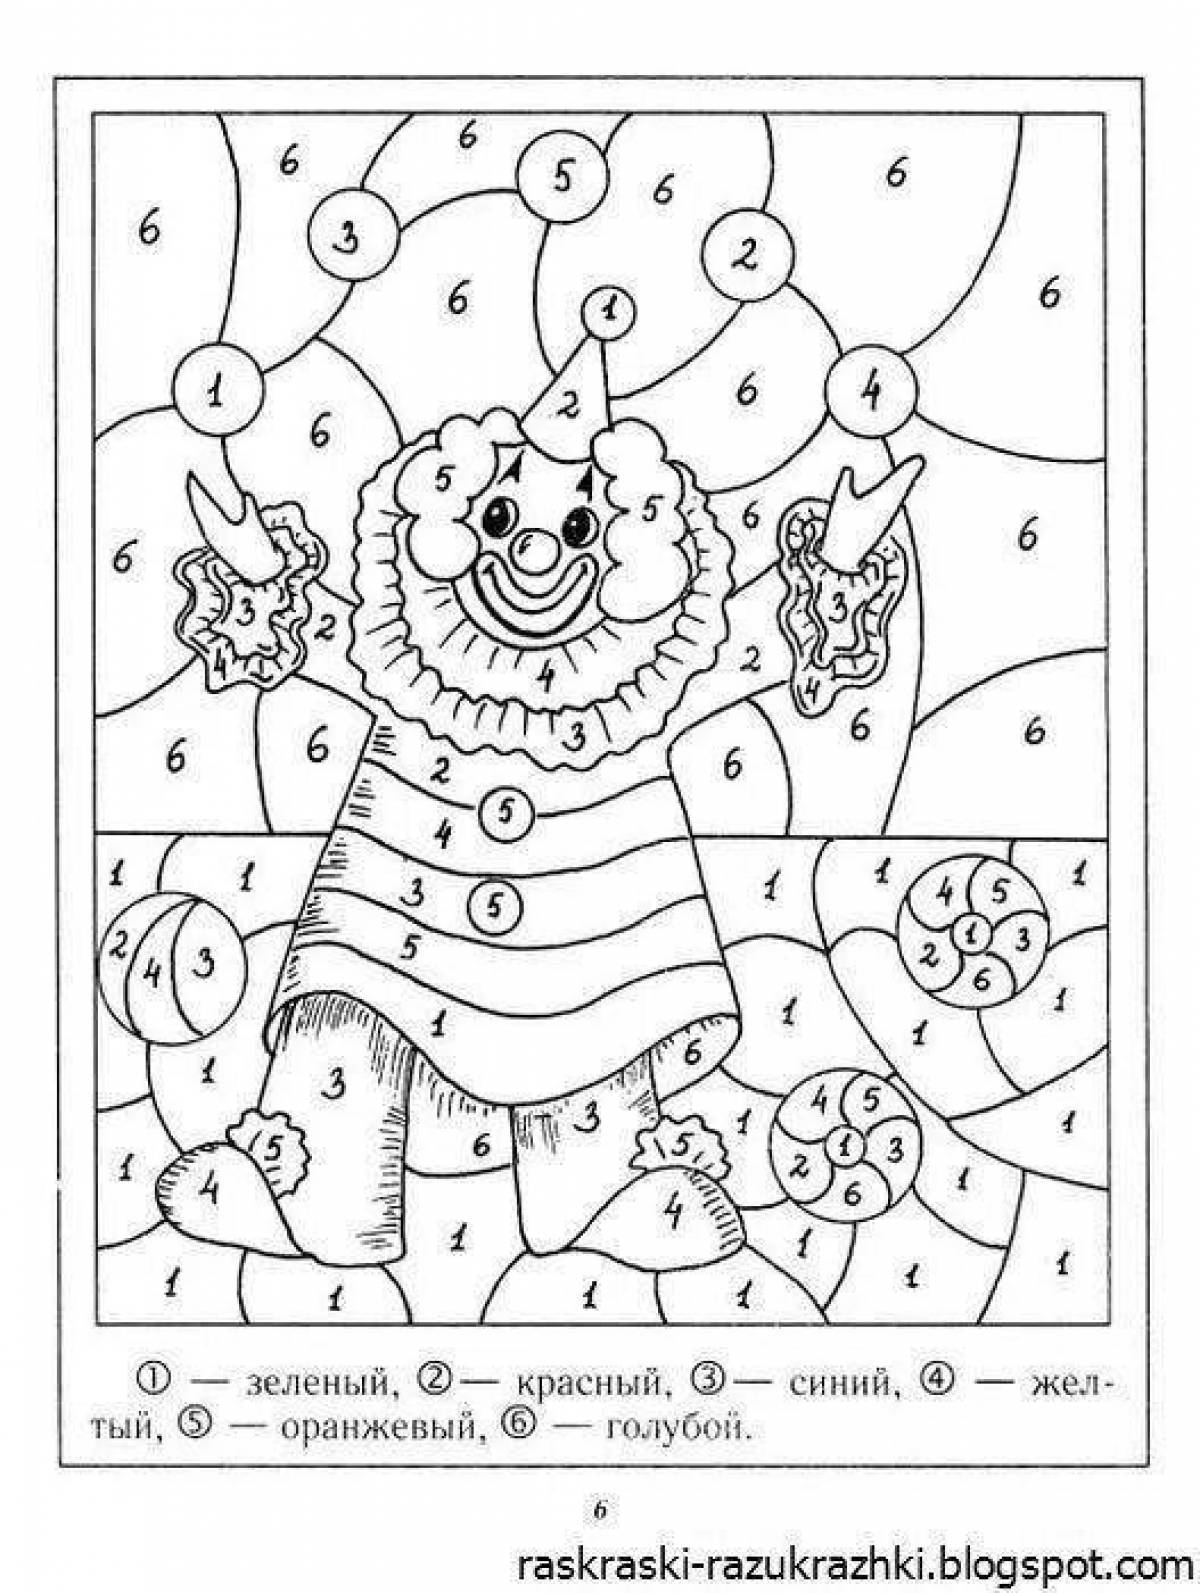 Stimulating coloring by numbers for 5 year olds